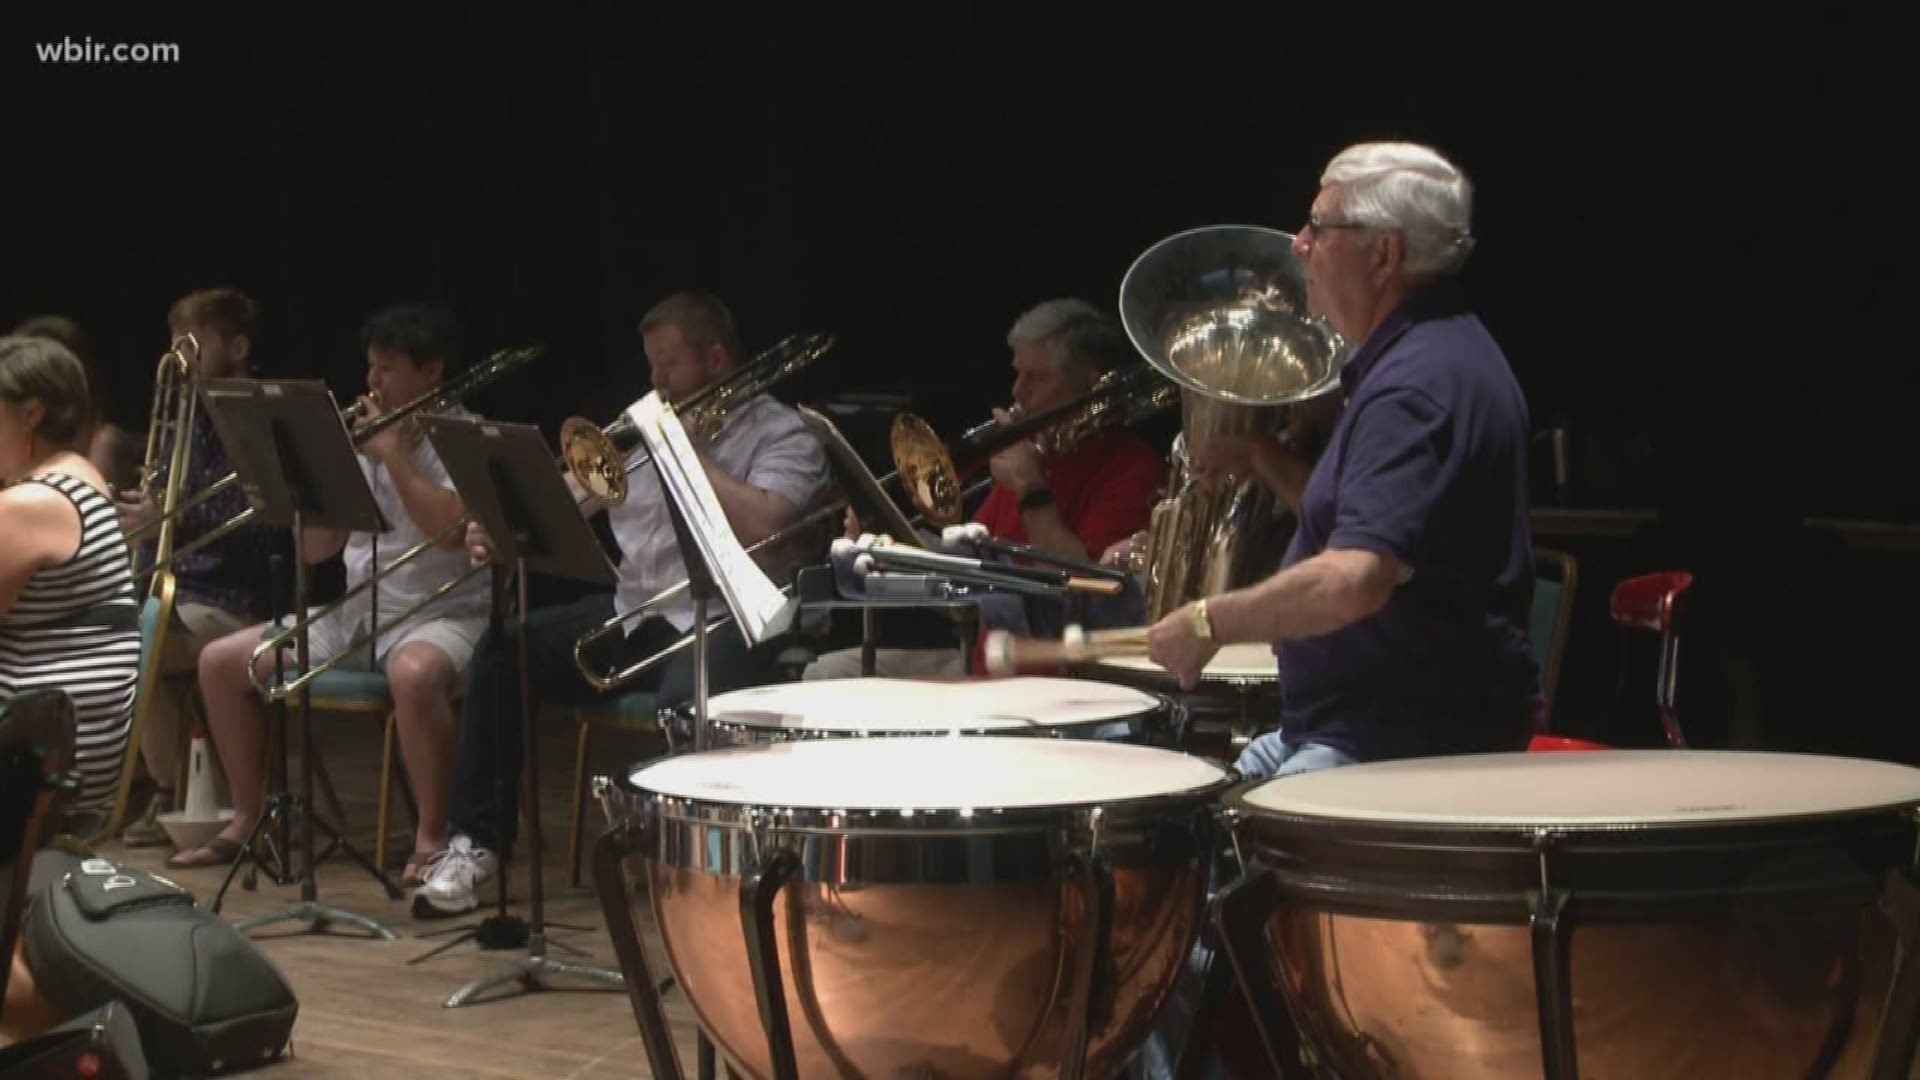 This will be the 34th time Knoxville Symphony Orchestra percussionist Mike Combs performs with the KSO for the Festival of the Fourth. The free concert starts Wednesday night at 8:00 at World's Fair Park.